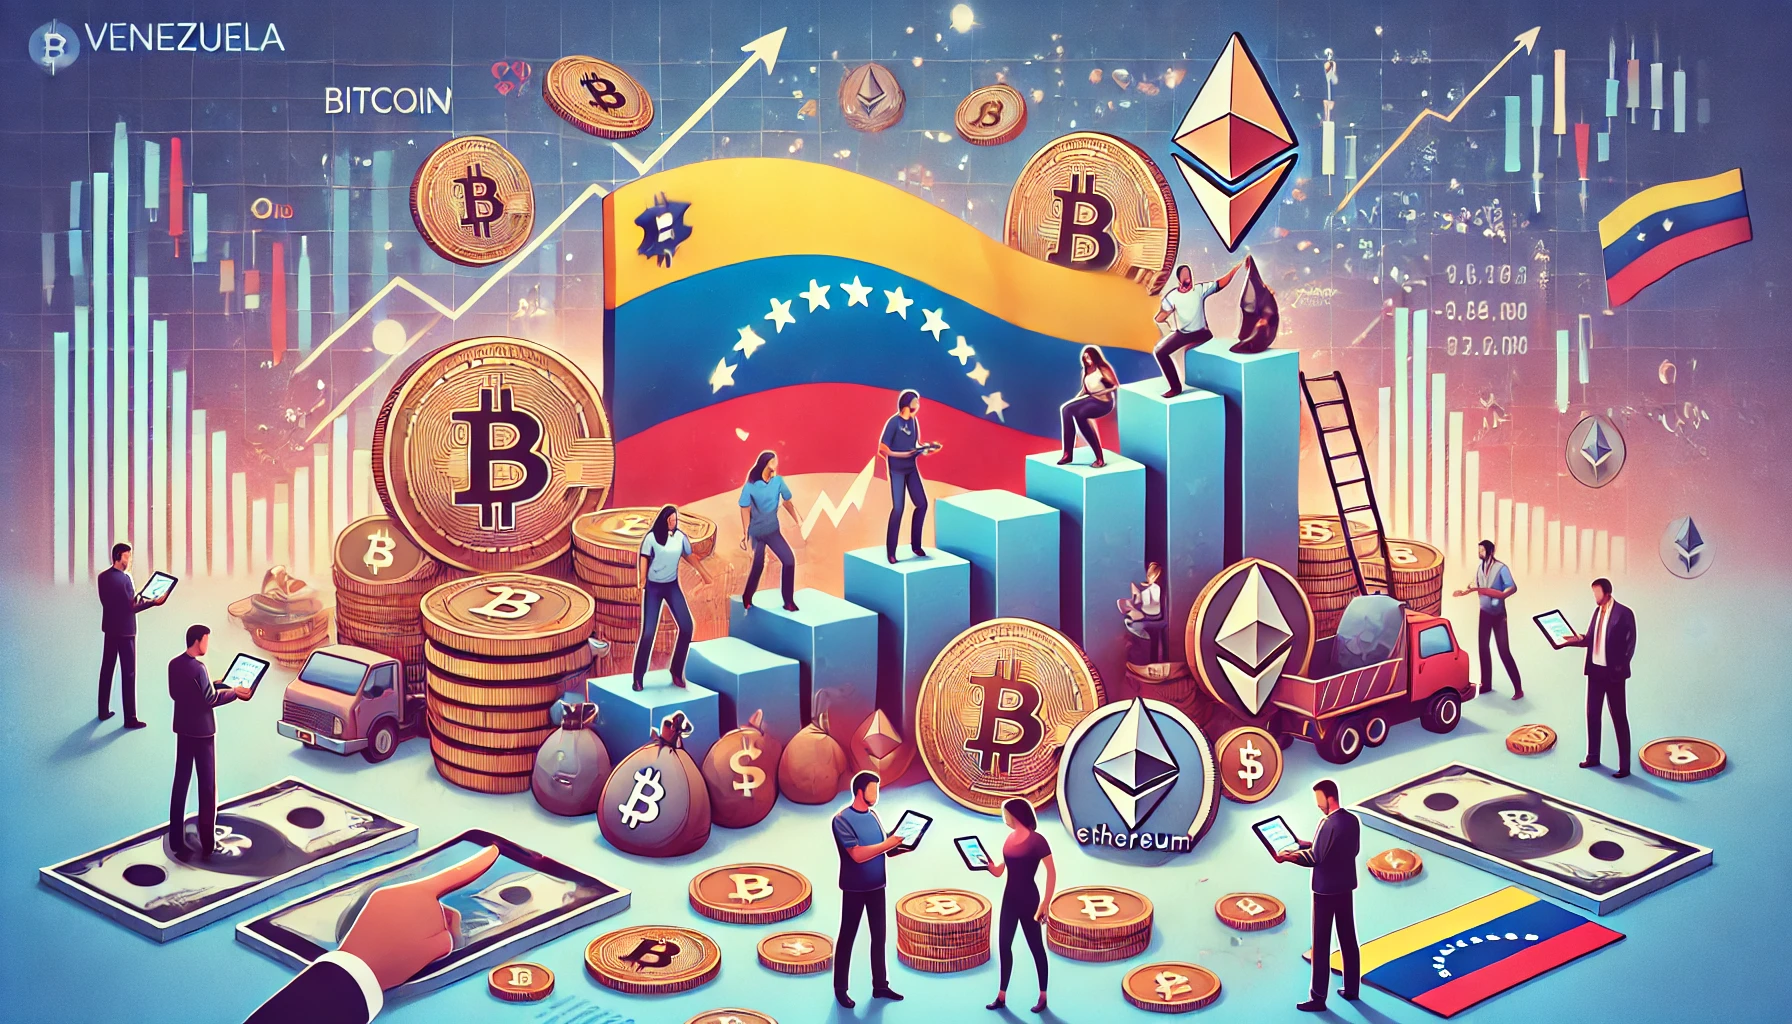 Venezuela's Transition to Cryptocurrency Usage Amid Economic Recovery and Hyperinflation Aftermath